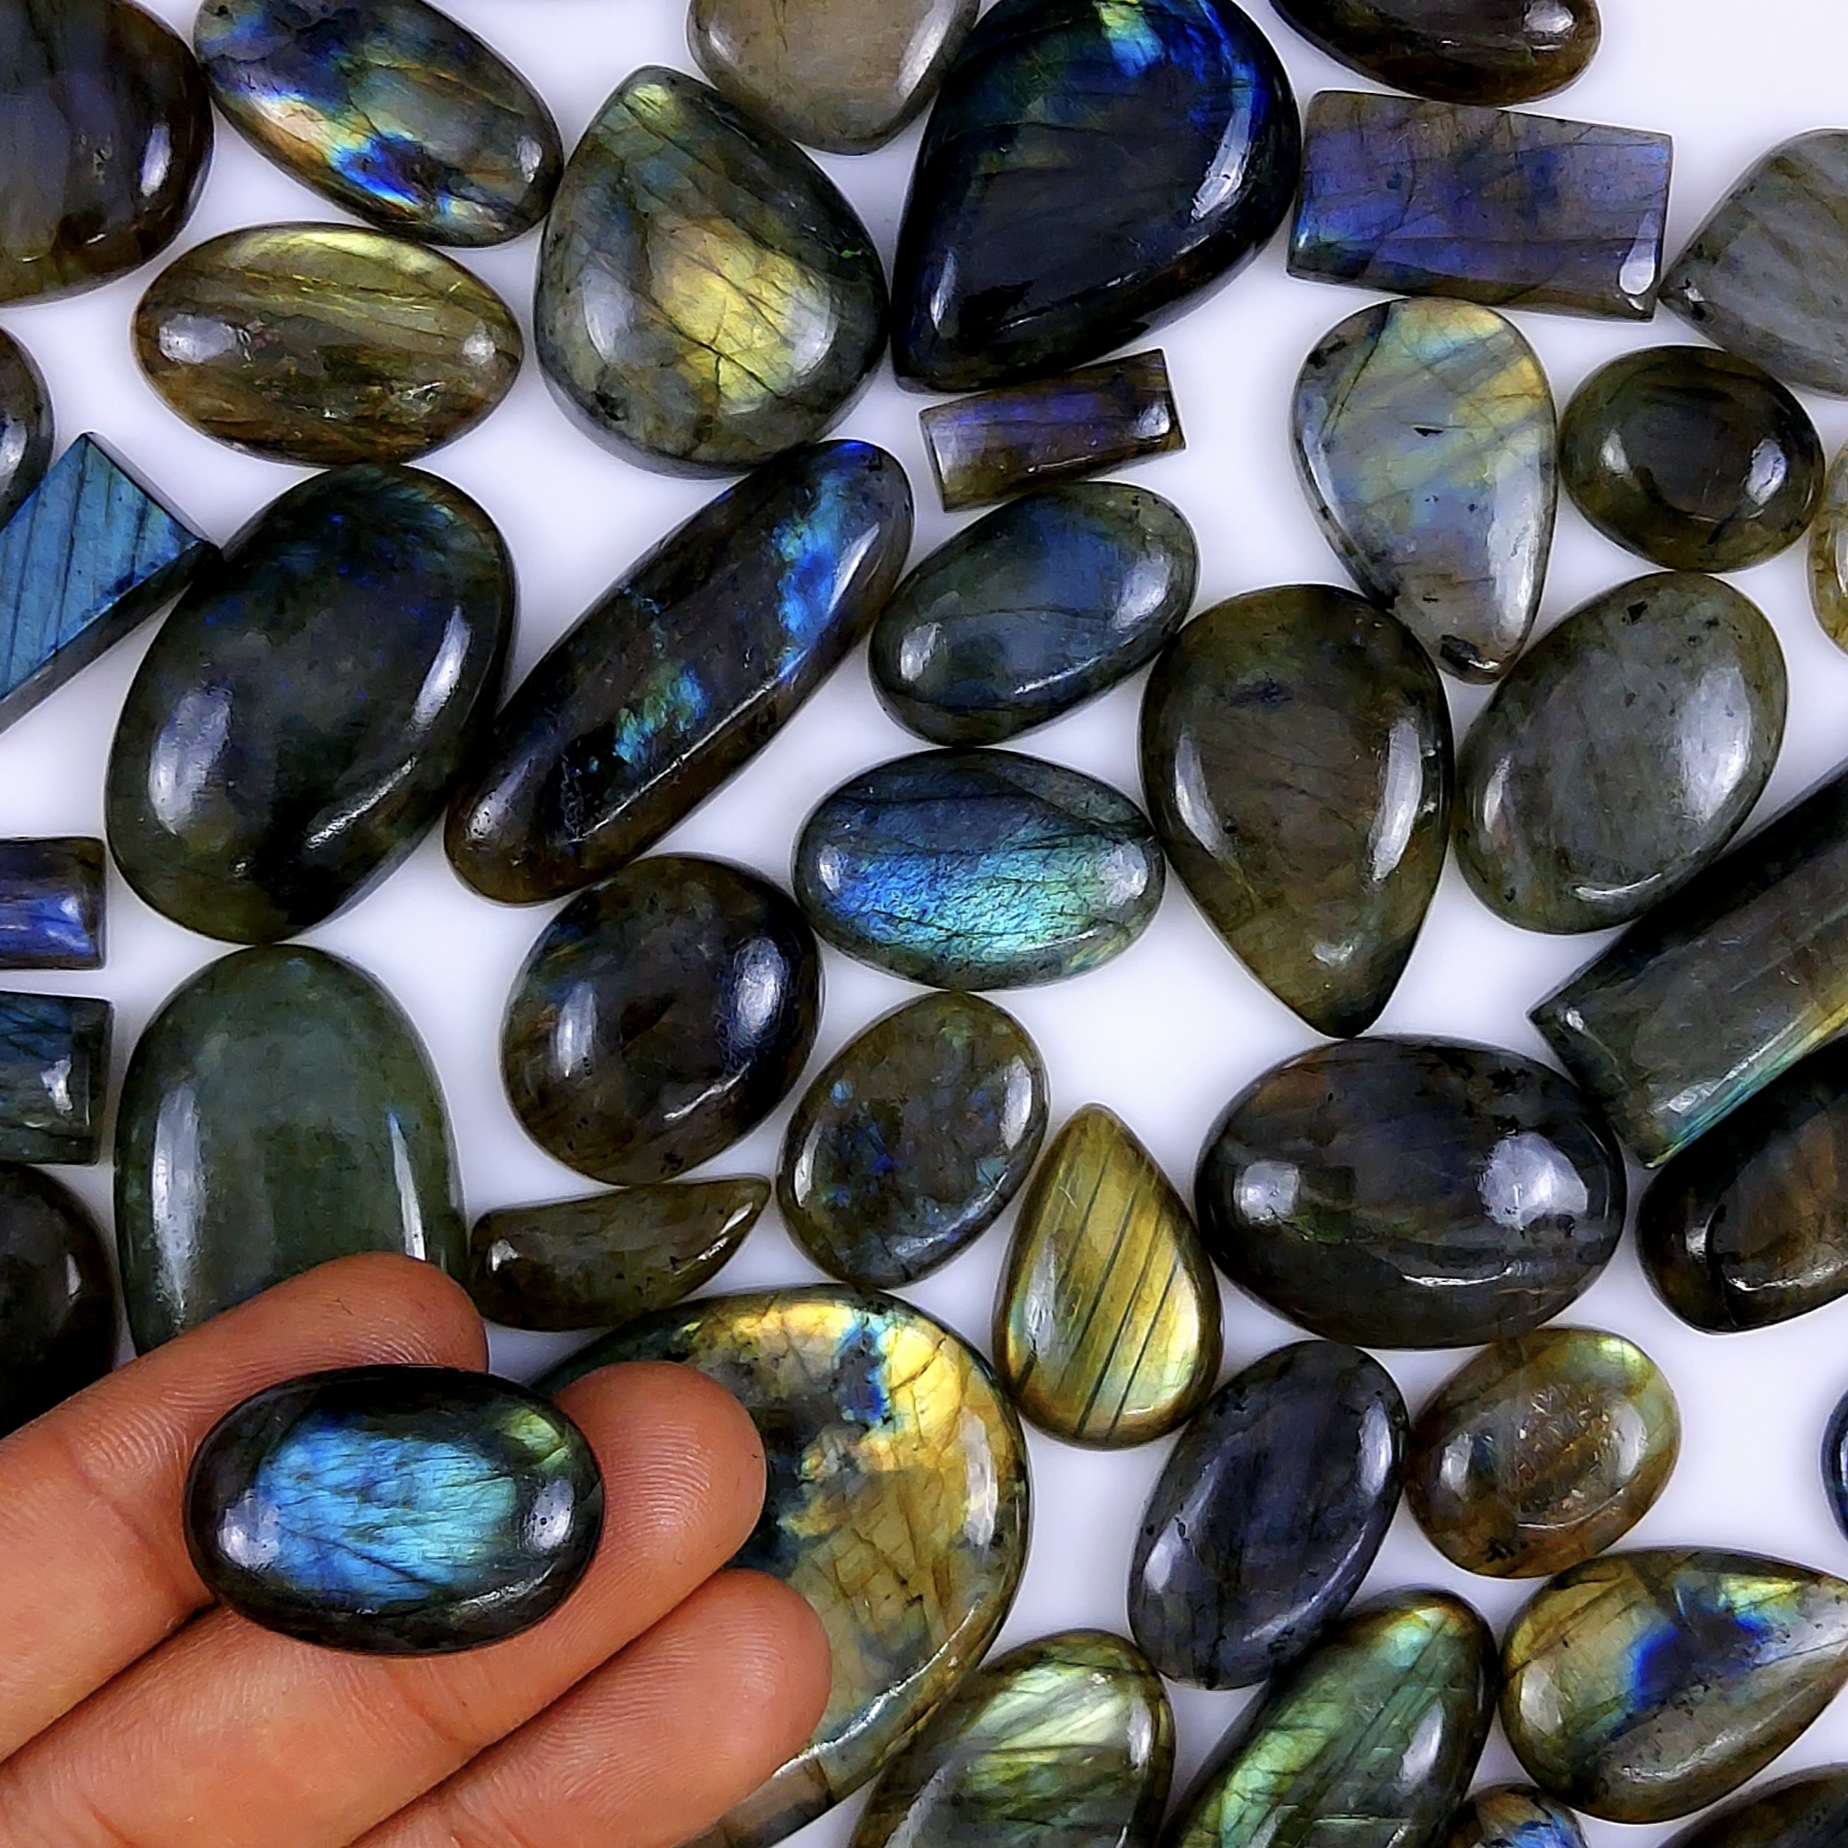 51pc 1744Cts Labradorite Cabochon Multifire Healing Crystal For Jewelry Supplies, Labradorite Necklace Handmade Wire Wrapped Gemstone Pendant 60x40 12x12mm#6262